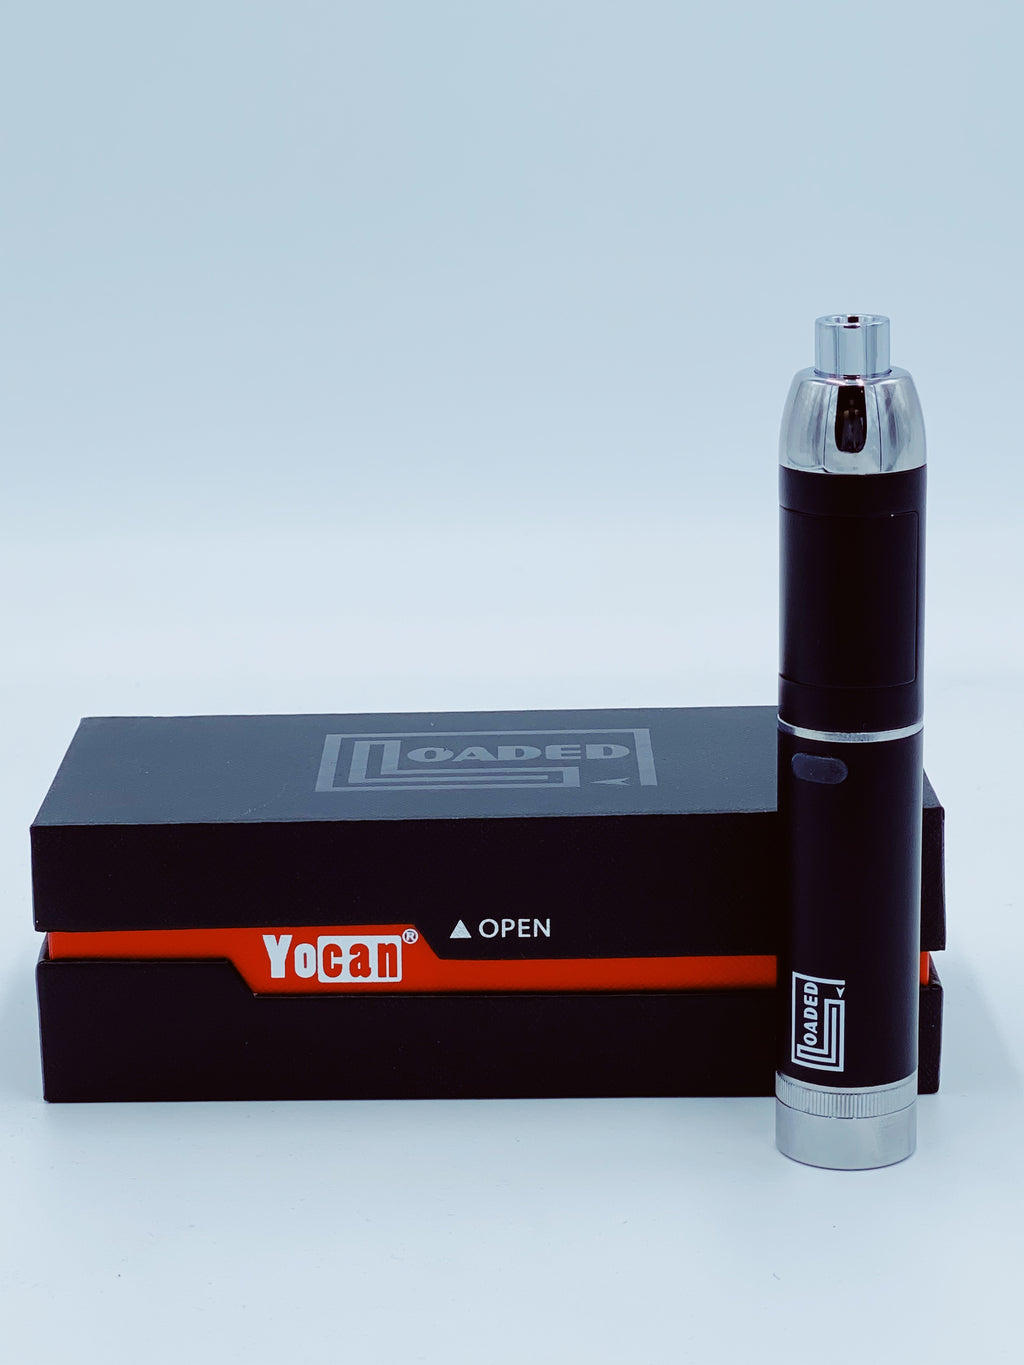 YOCAN LOADED CONCENTRATION VAPORIZER - Smoke Country - Land of the artistic glass blown bongs